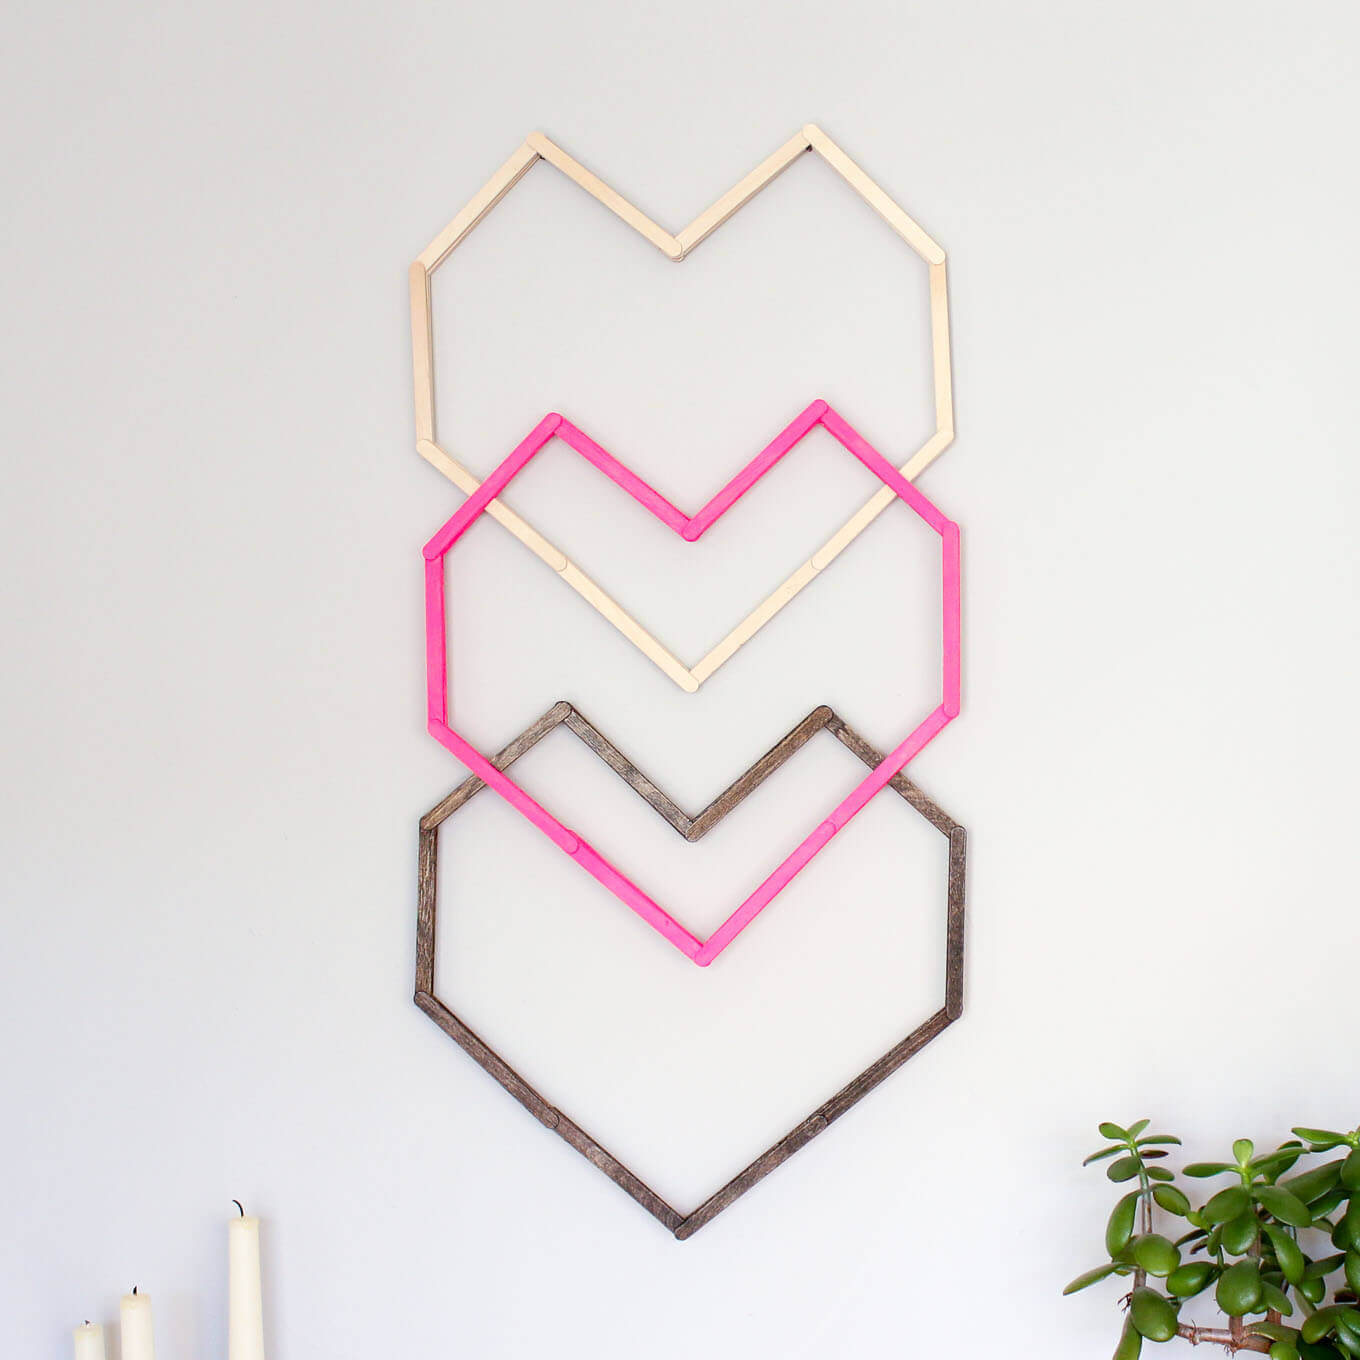 16 Creative DIY Wall Art Ideas You Should Try Making